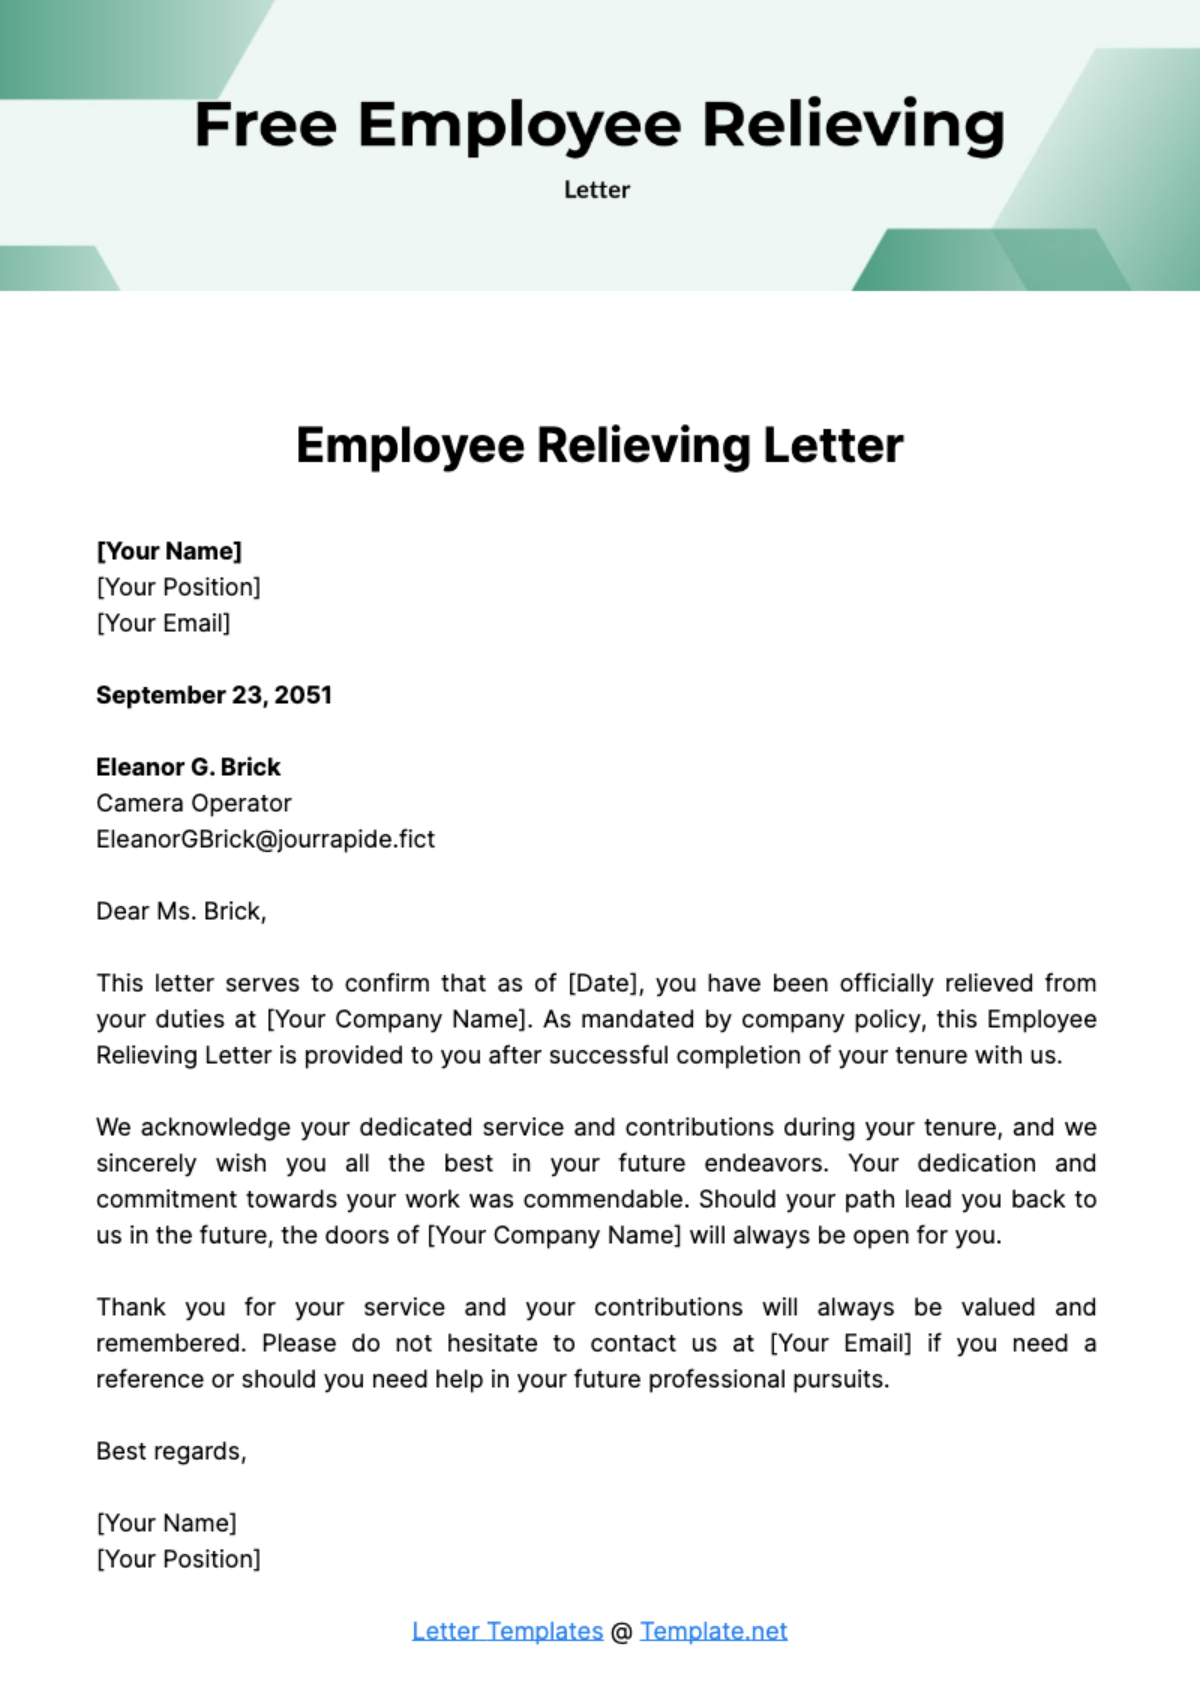 Employee Relieving Letter Template